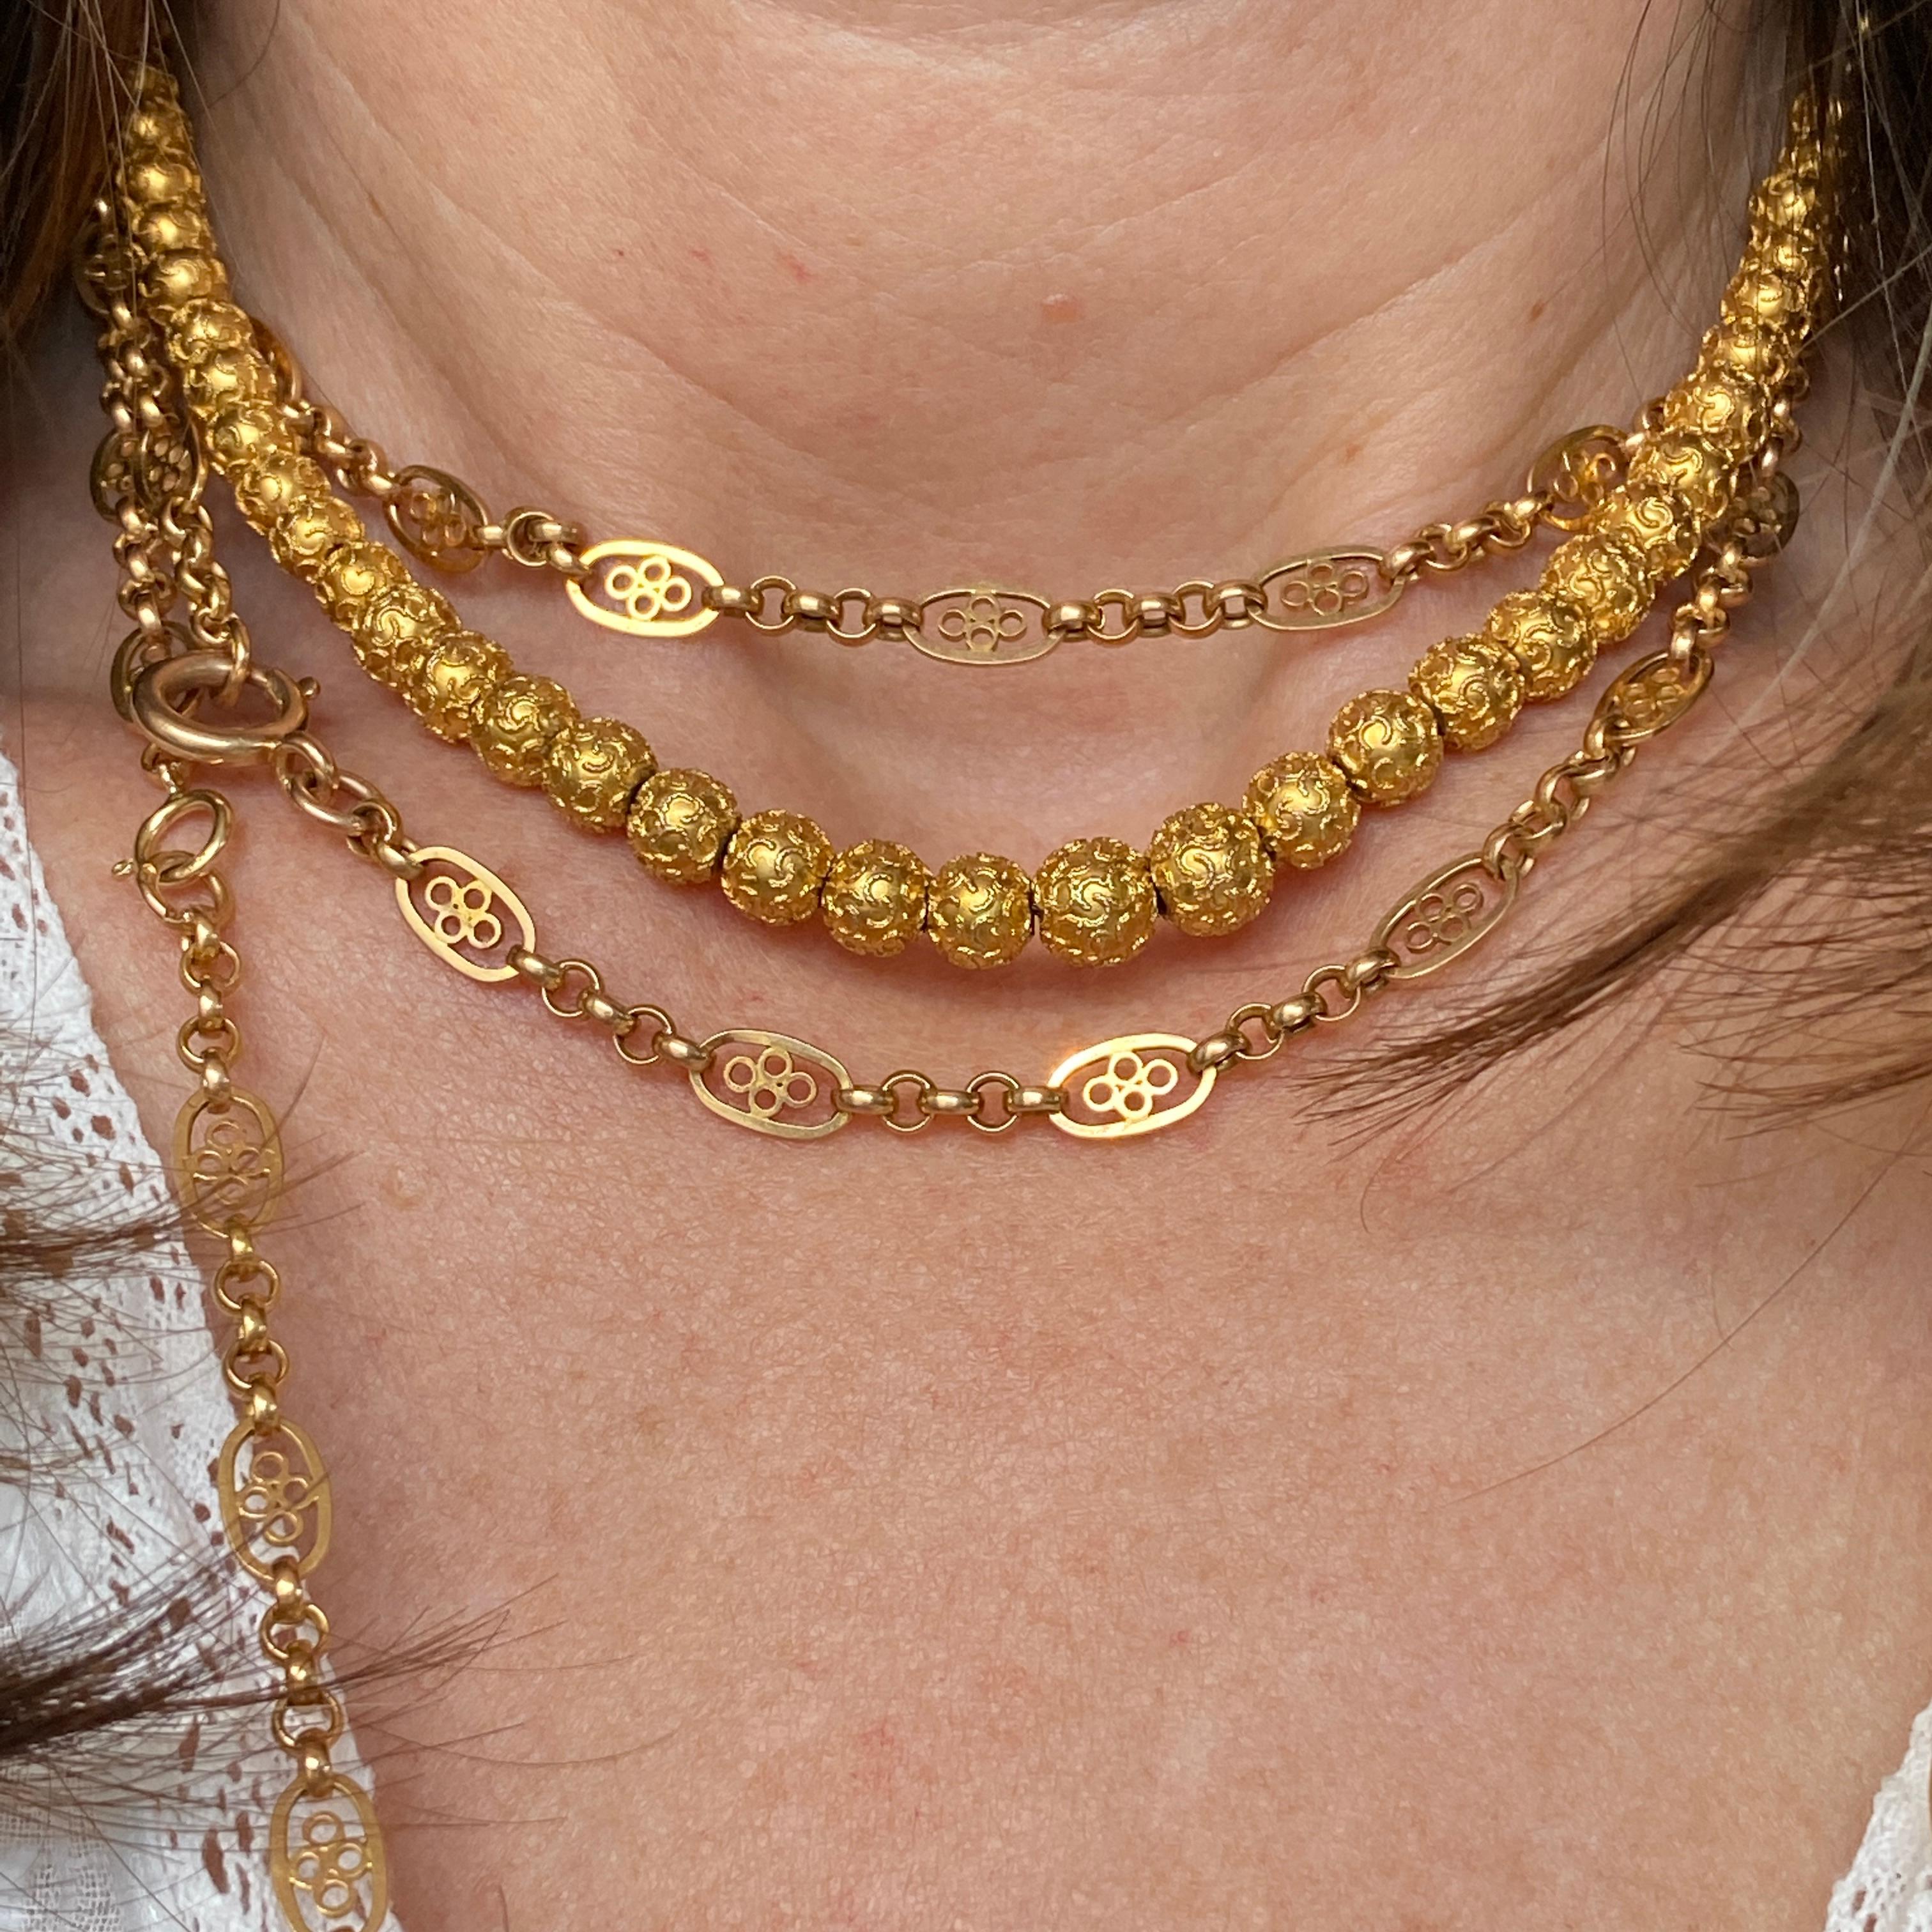 RARE Victorian Etruscan 18/14K Choker Beads Necklace For Sale 3